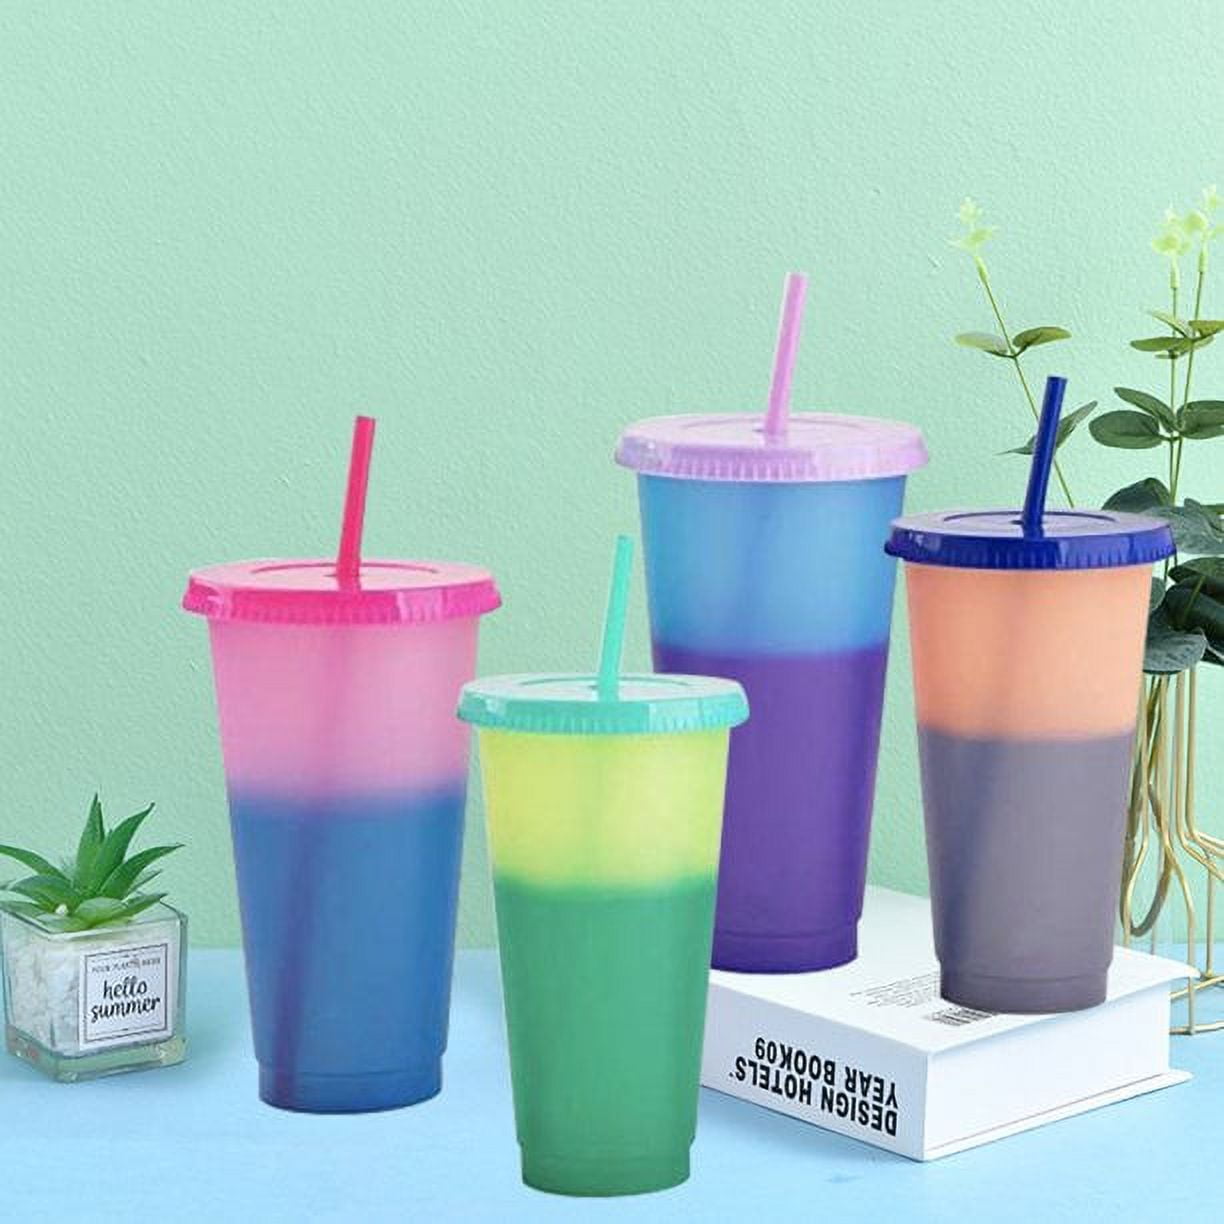 Triani Plastic Cups with Lids and Straws for Adults - 5 Reusable Cold Cups  in Bright Colors, 24oz Color Changing Cups Iced Coffee Cup,Smoothie